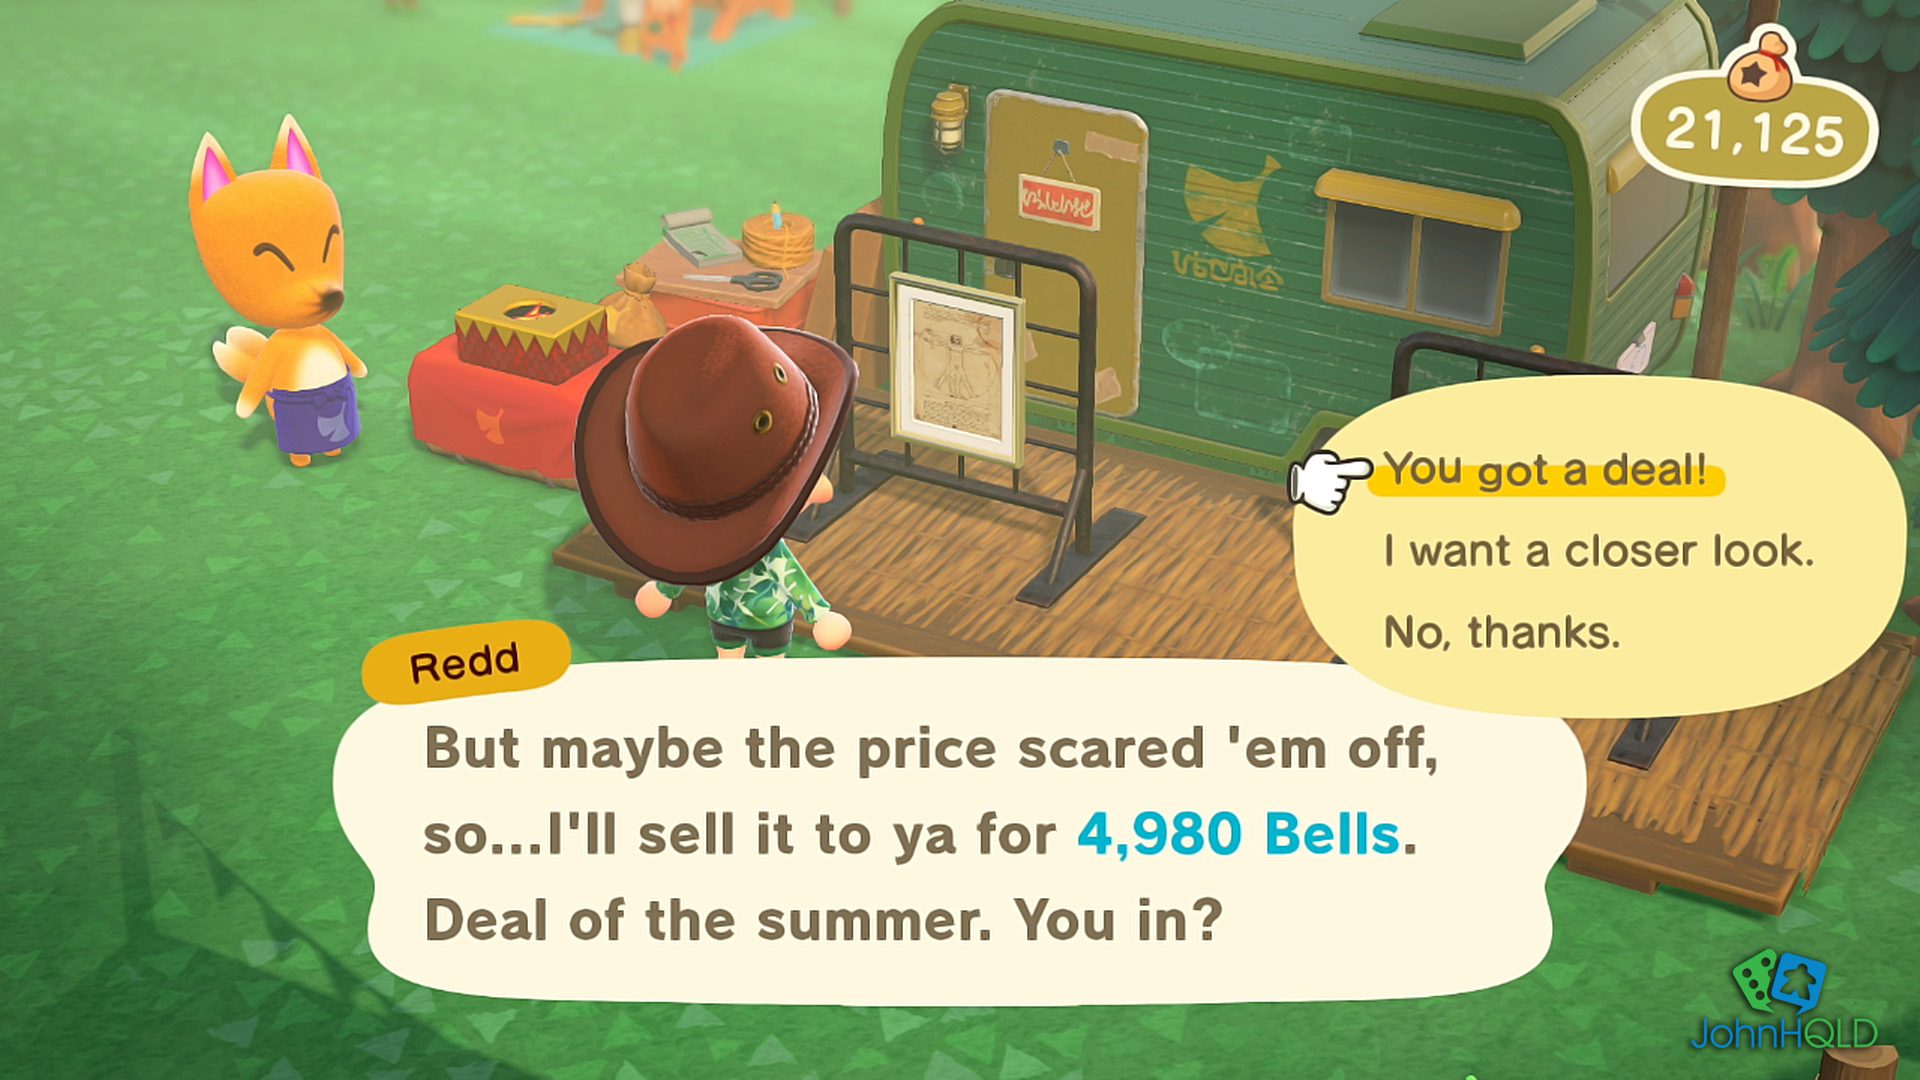 20220207 - Animal Crossing New Horizons - Should i buy the fakes hoping for originlas